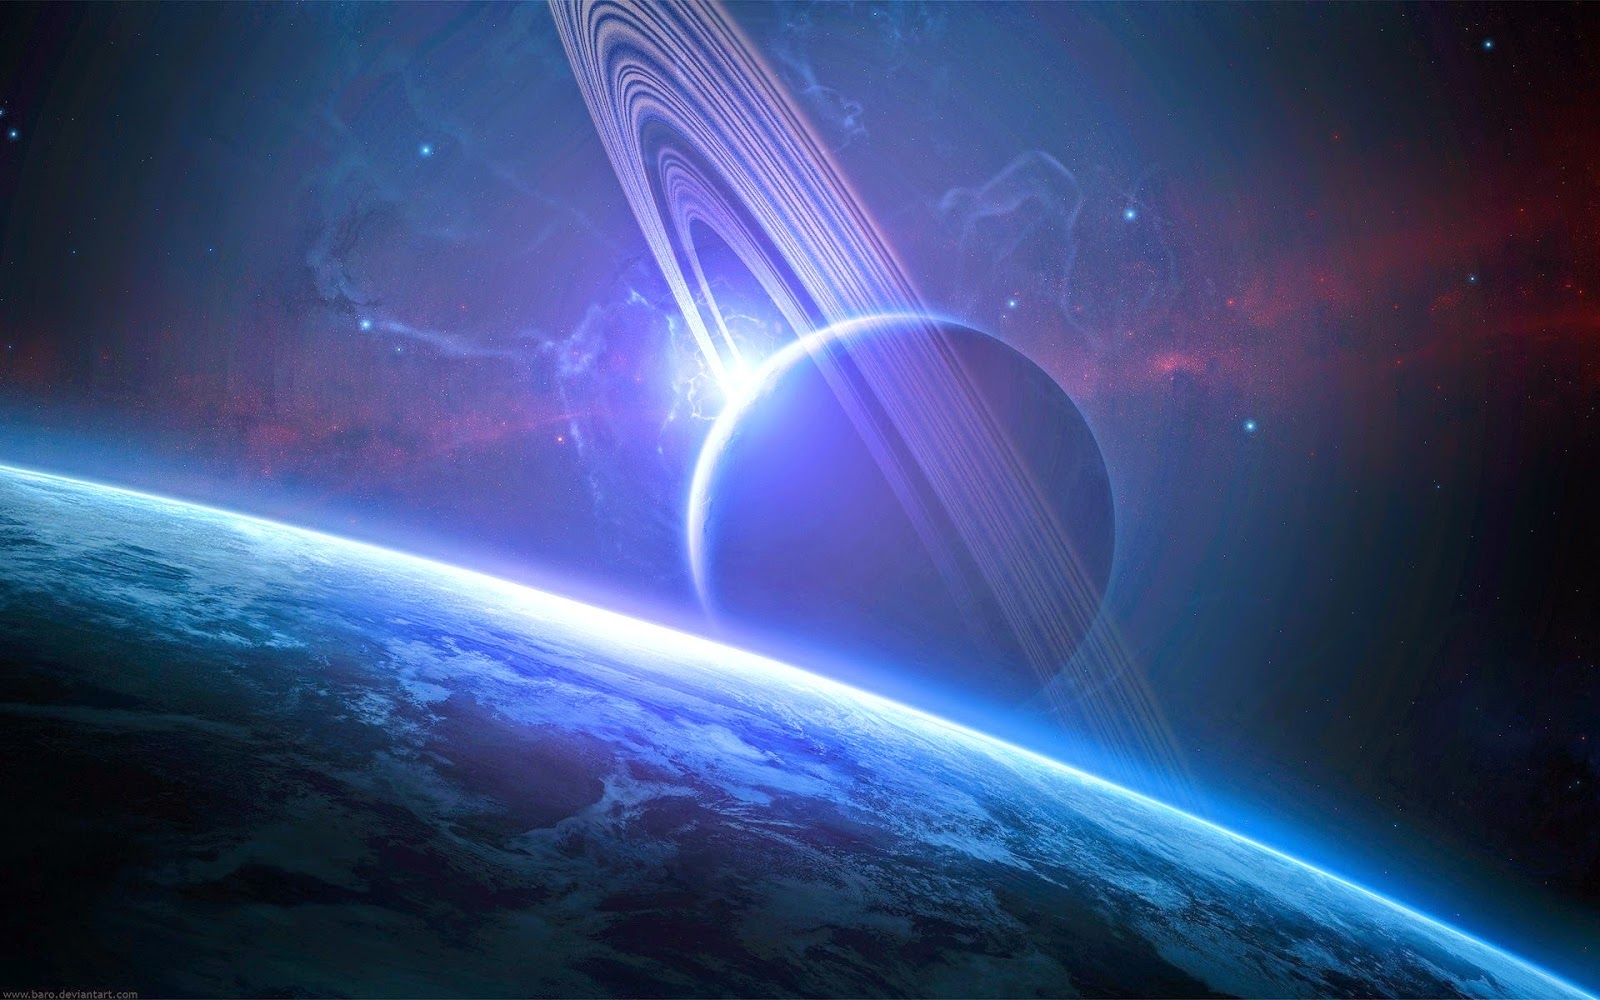 Space - HD Wallpapers | Earth Blog